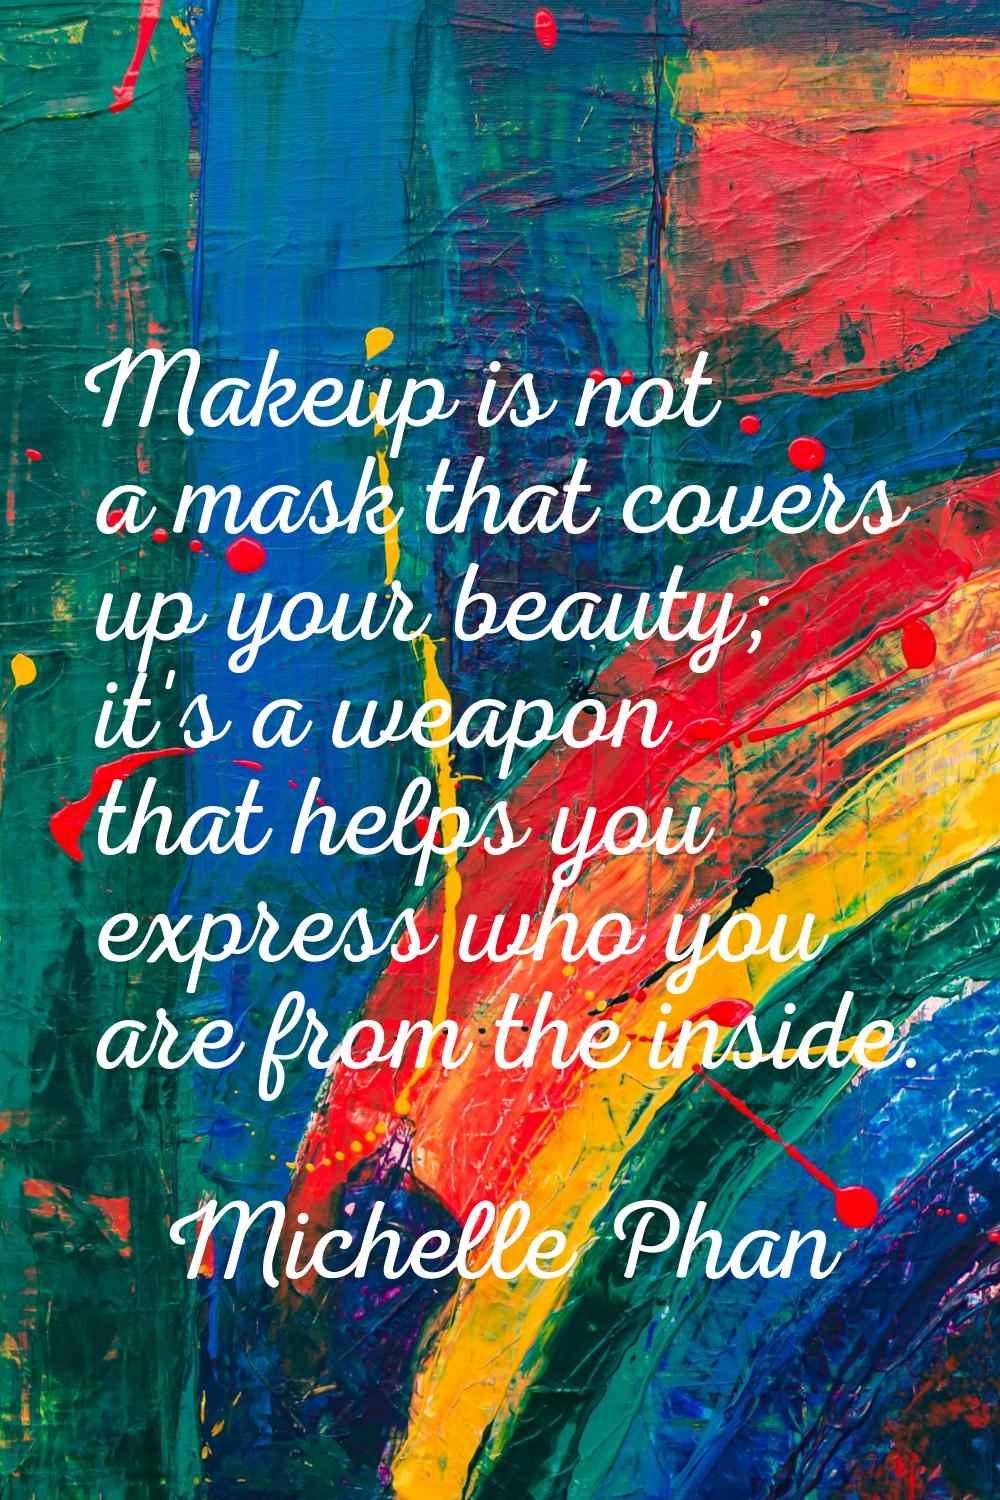 Makeup is not a mask that covers up your beauty; it's a weapon that helps you express who you are f